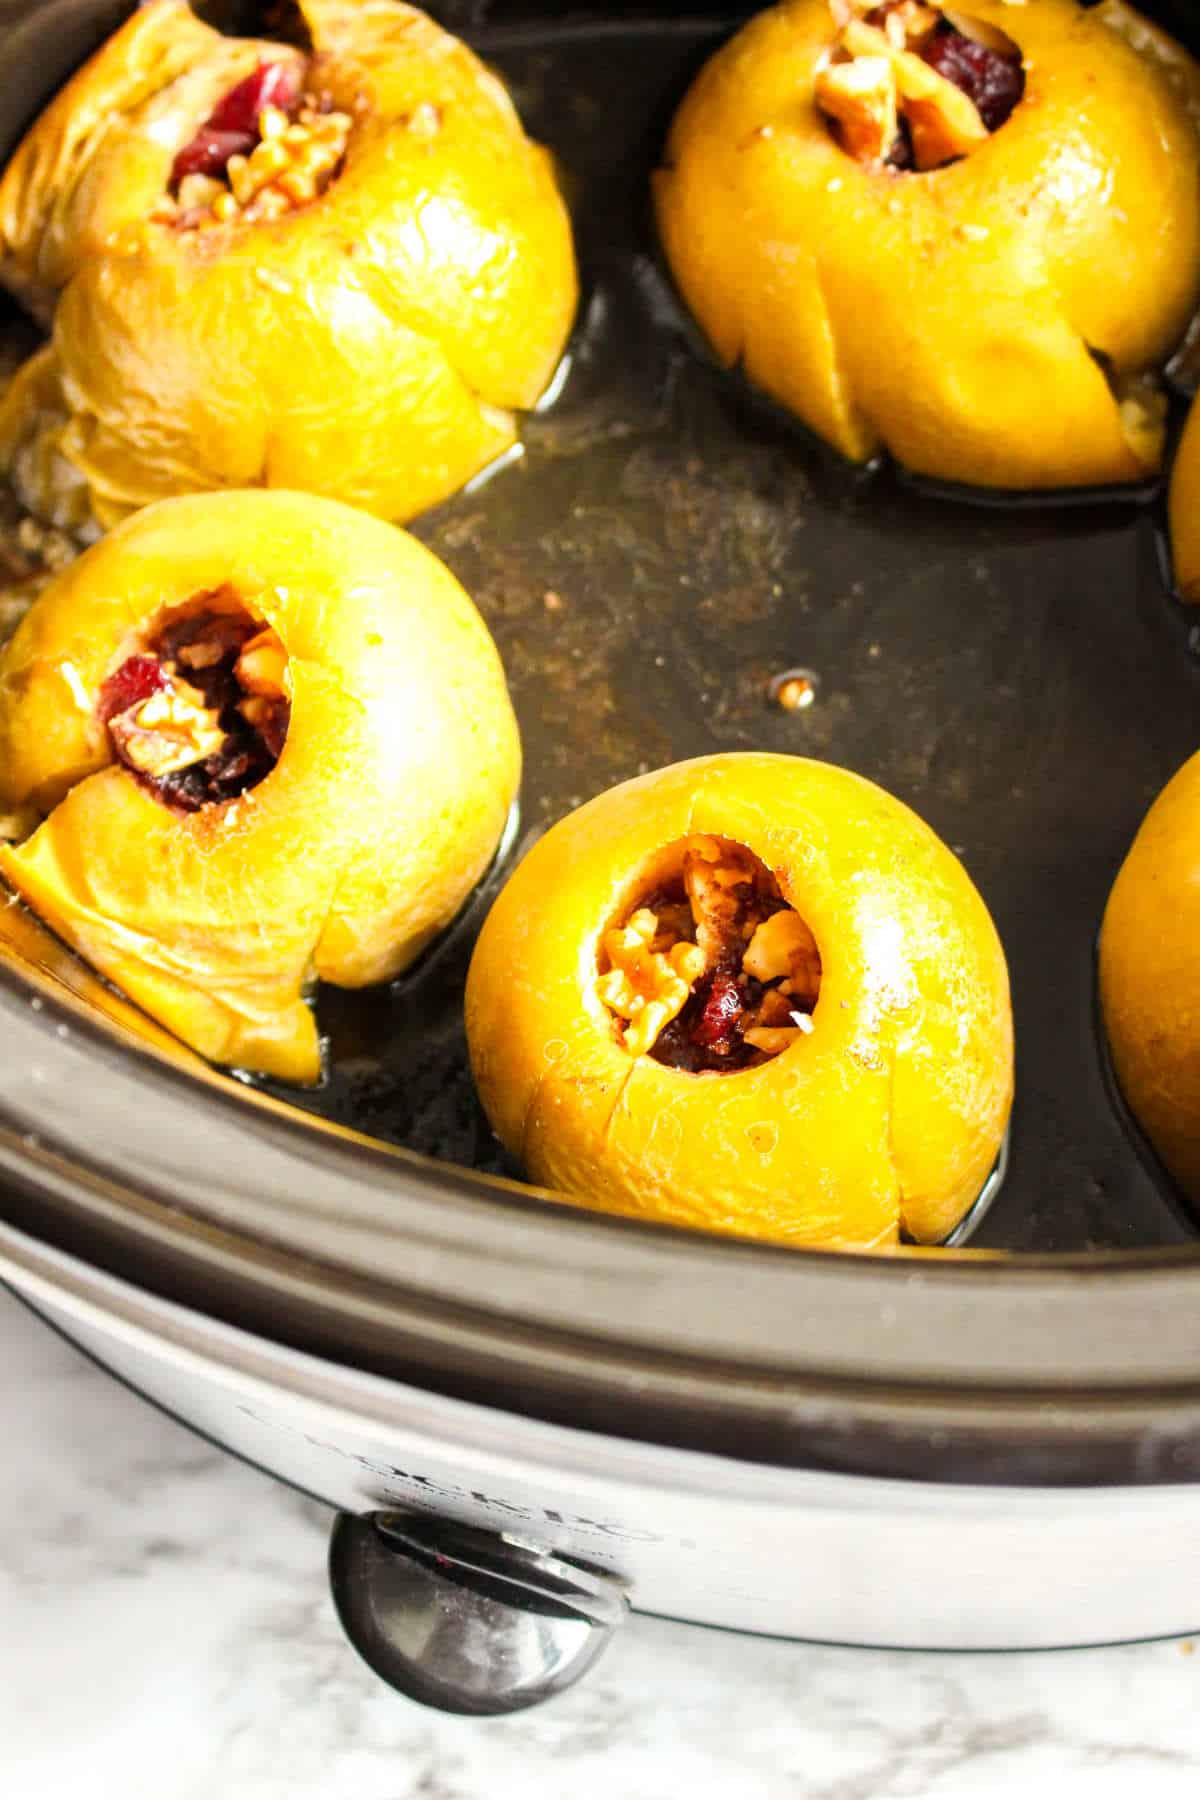 slow cooker baked apples stuffed with cranberries and walnuts.